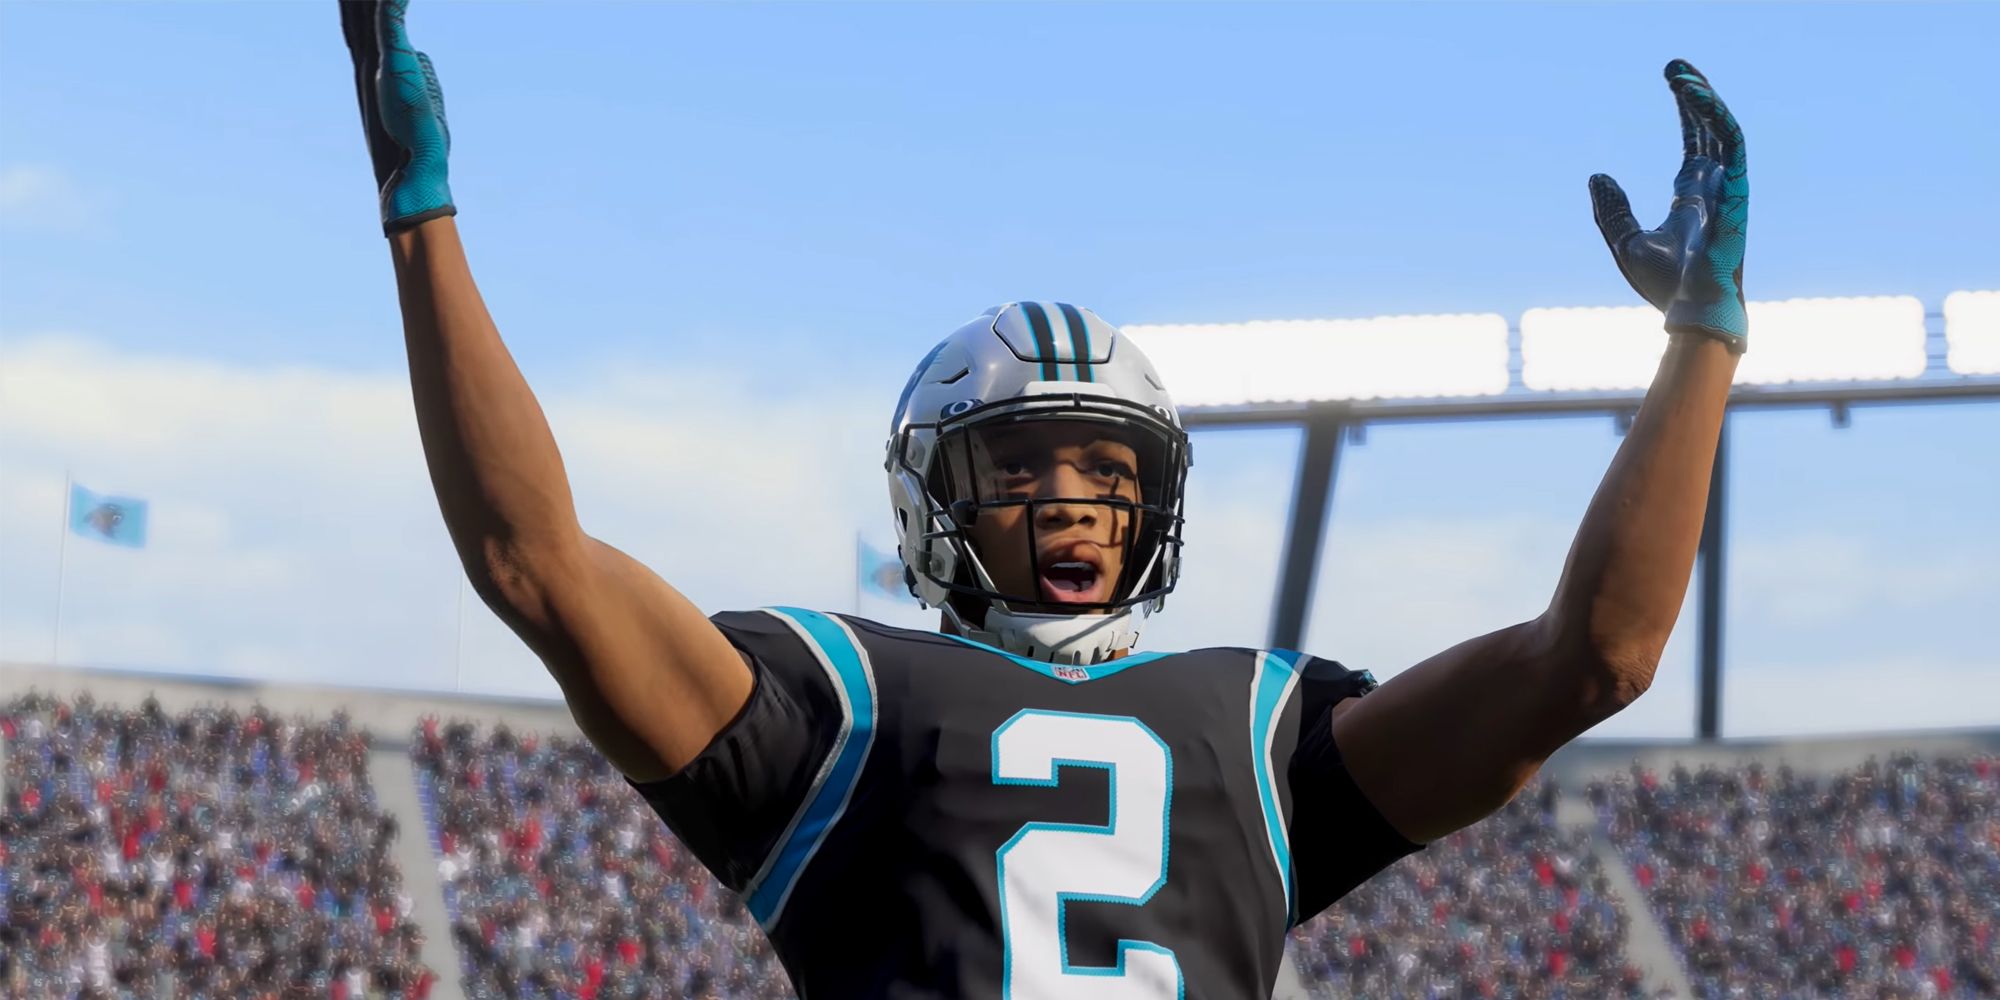 two player madden 19 pc